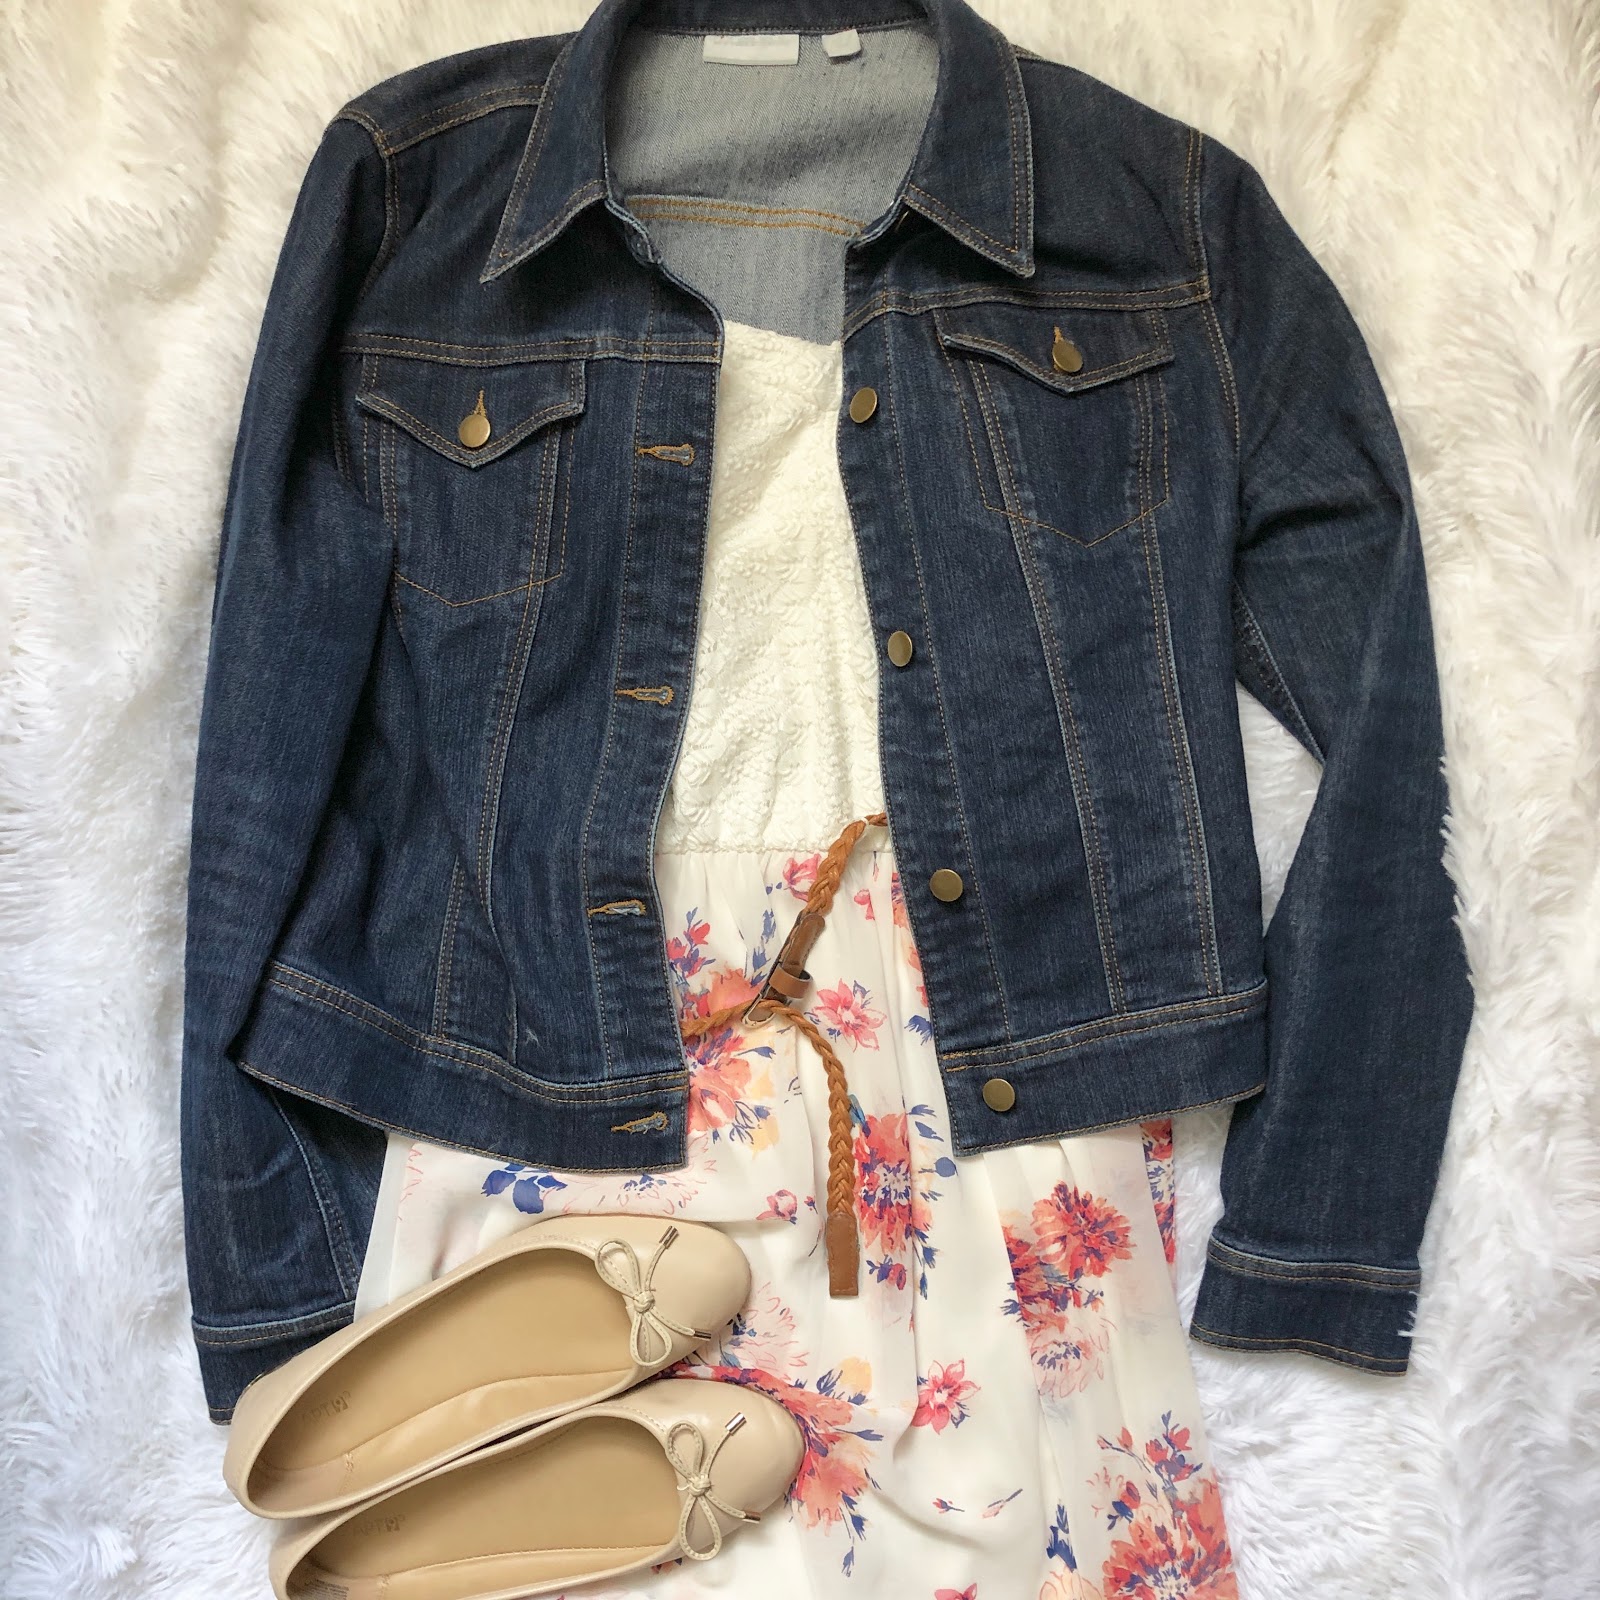 denim themed outfit